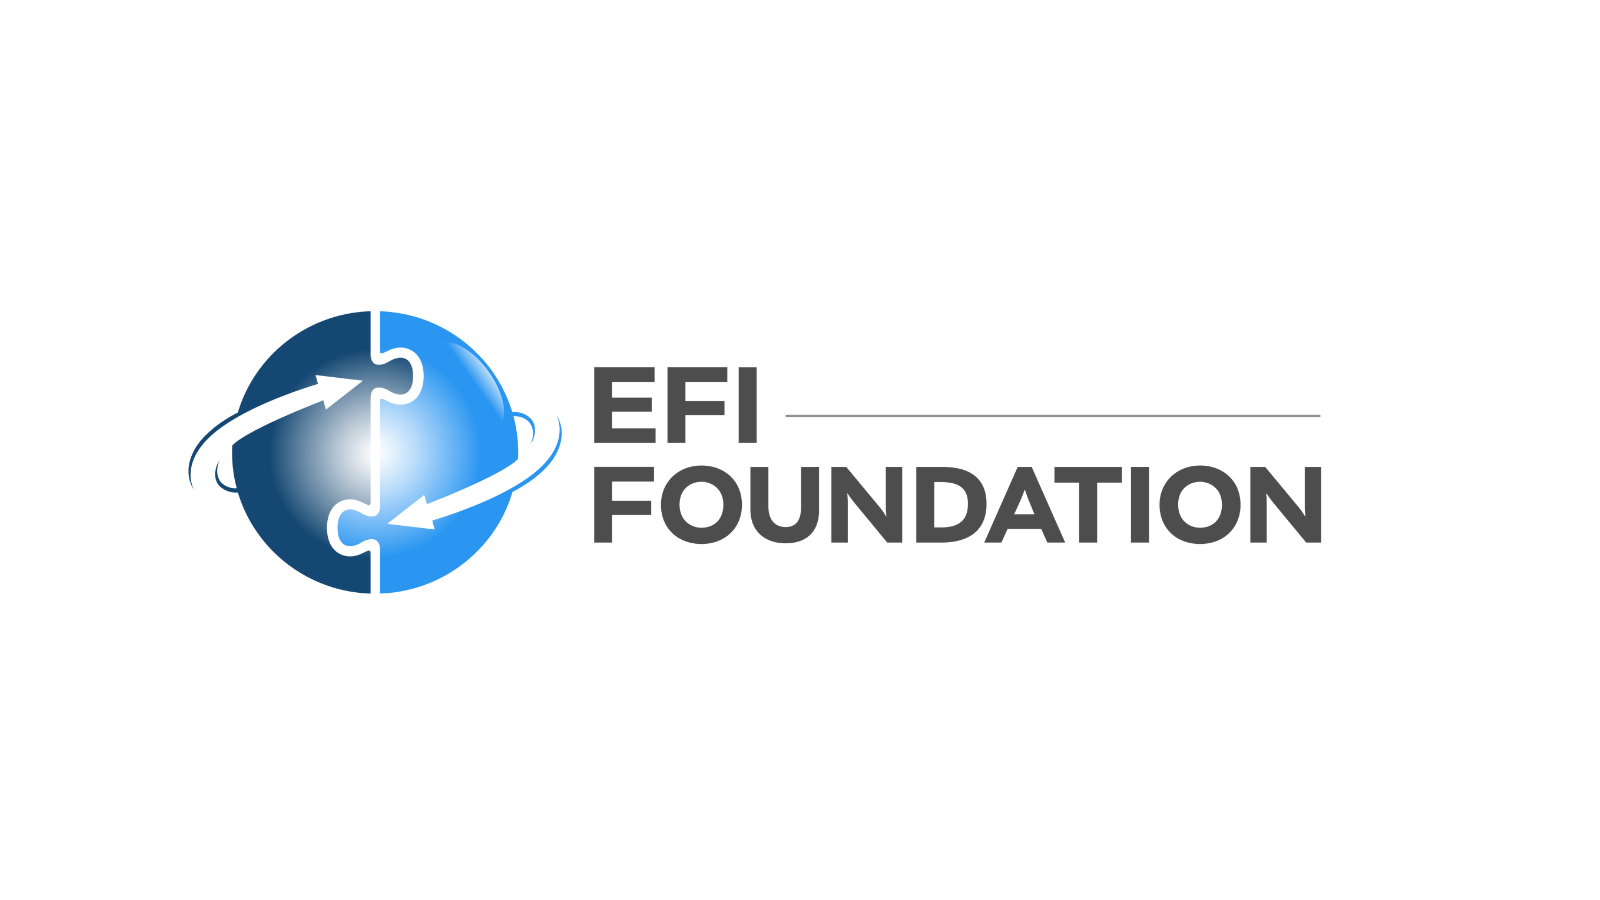 EFI Foundation logo to accompany announcement from the U.S. Department of Energy.